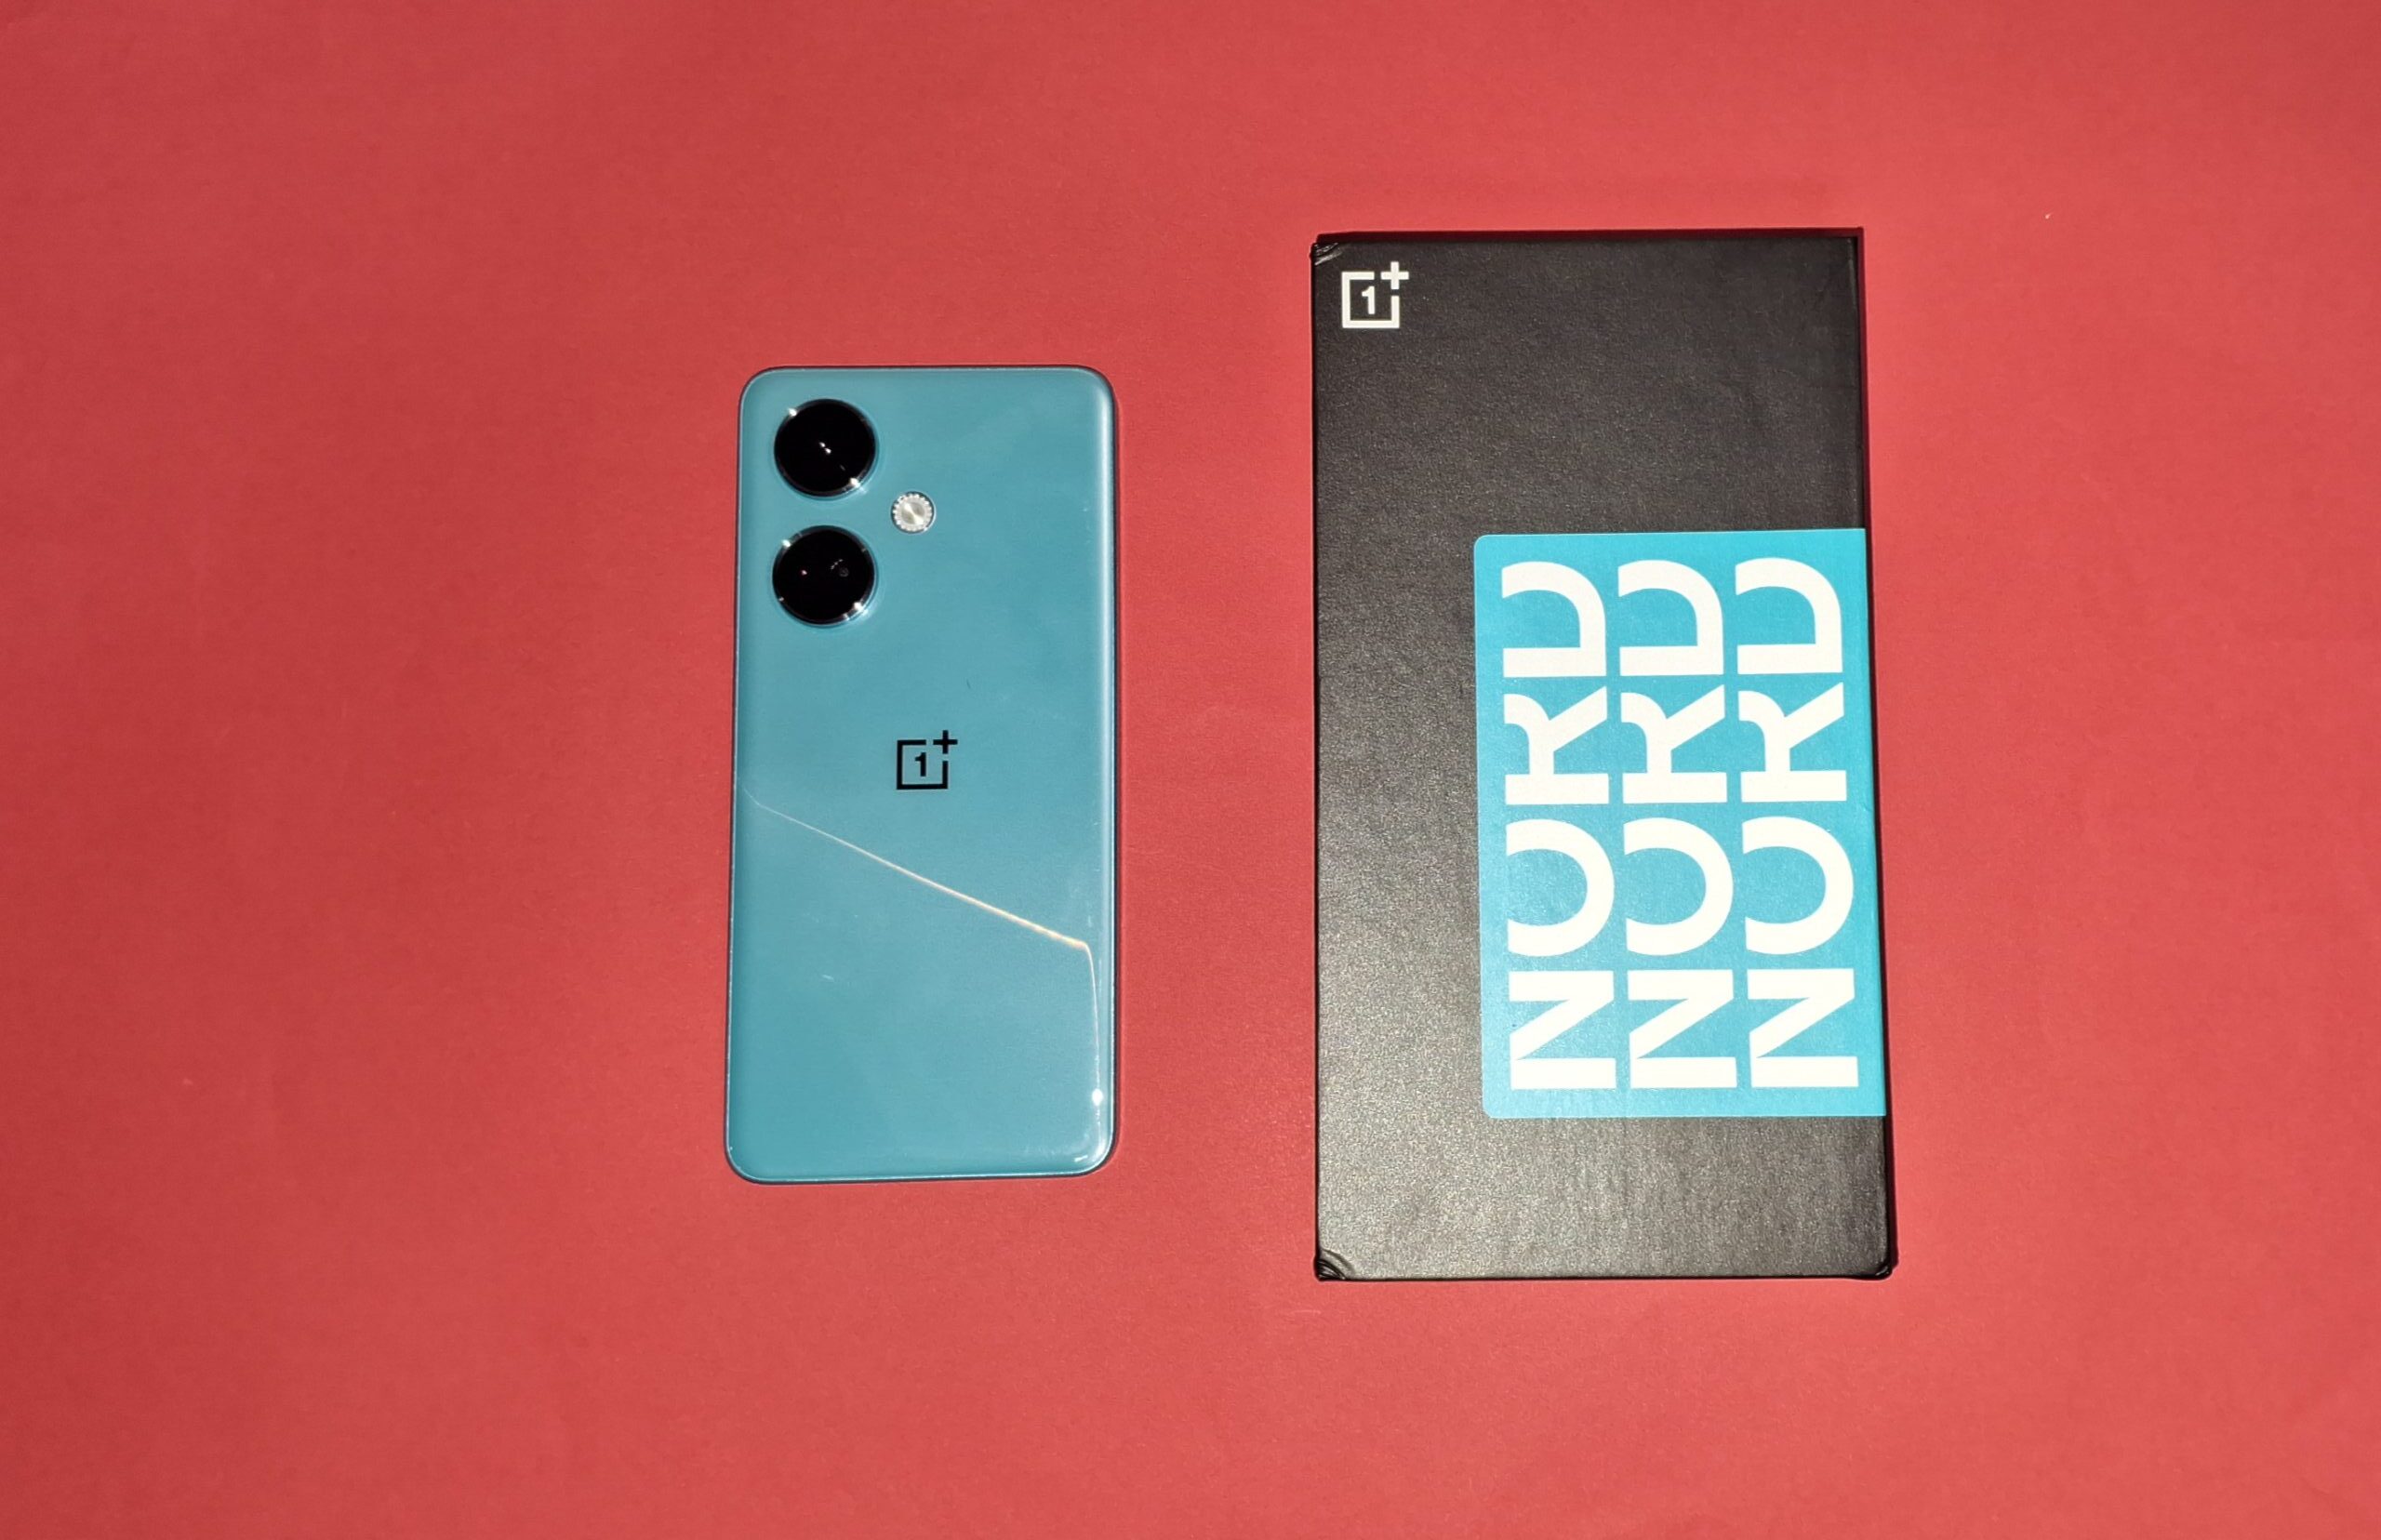 Nord CE3 5G Review: The OnePlus we Love!